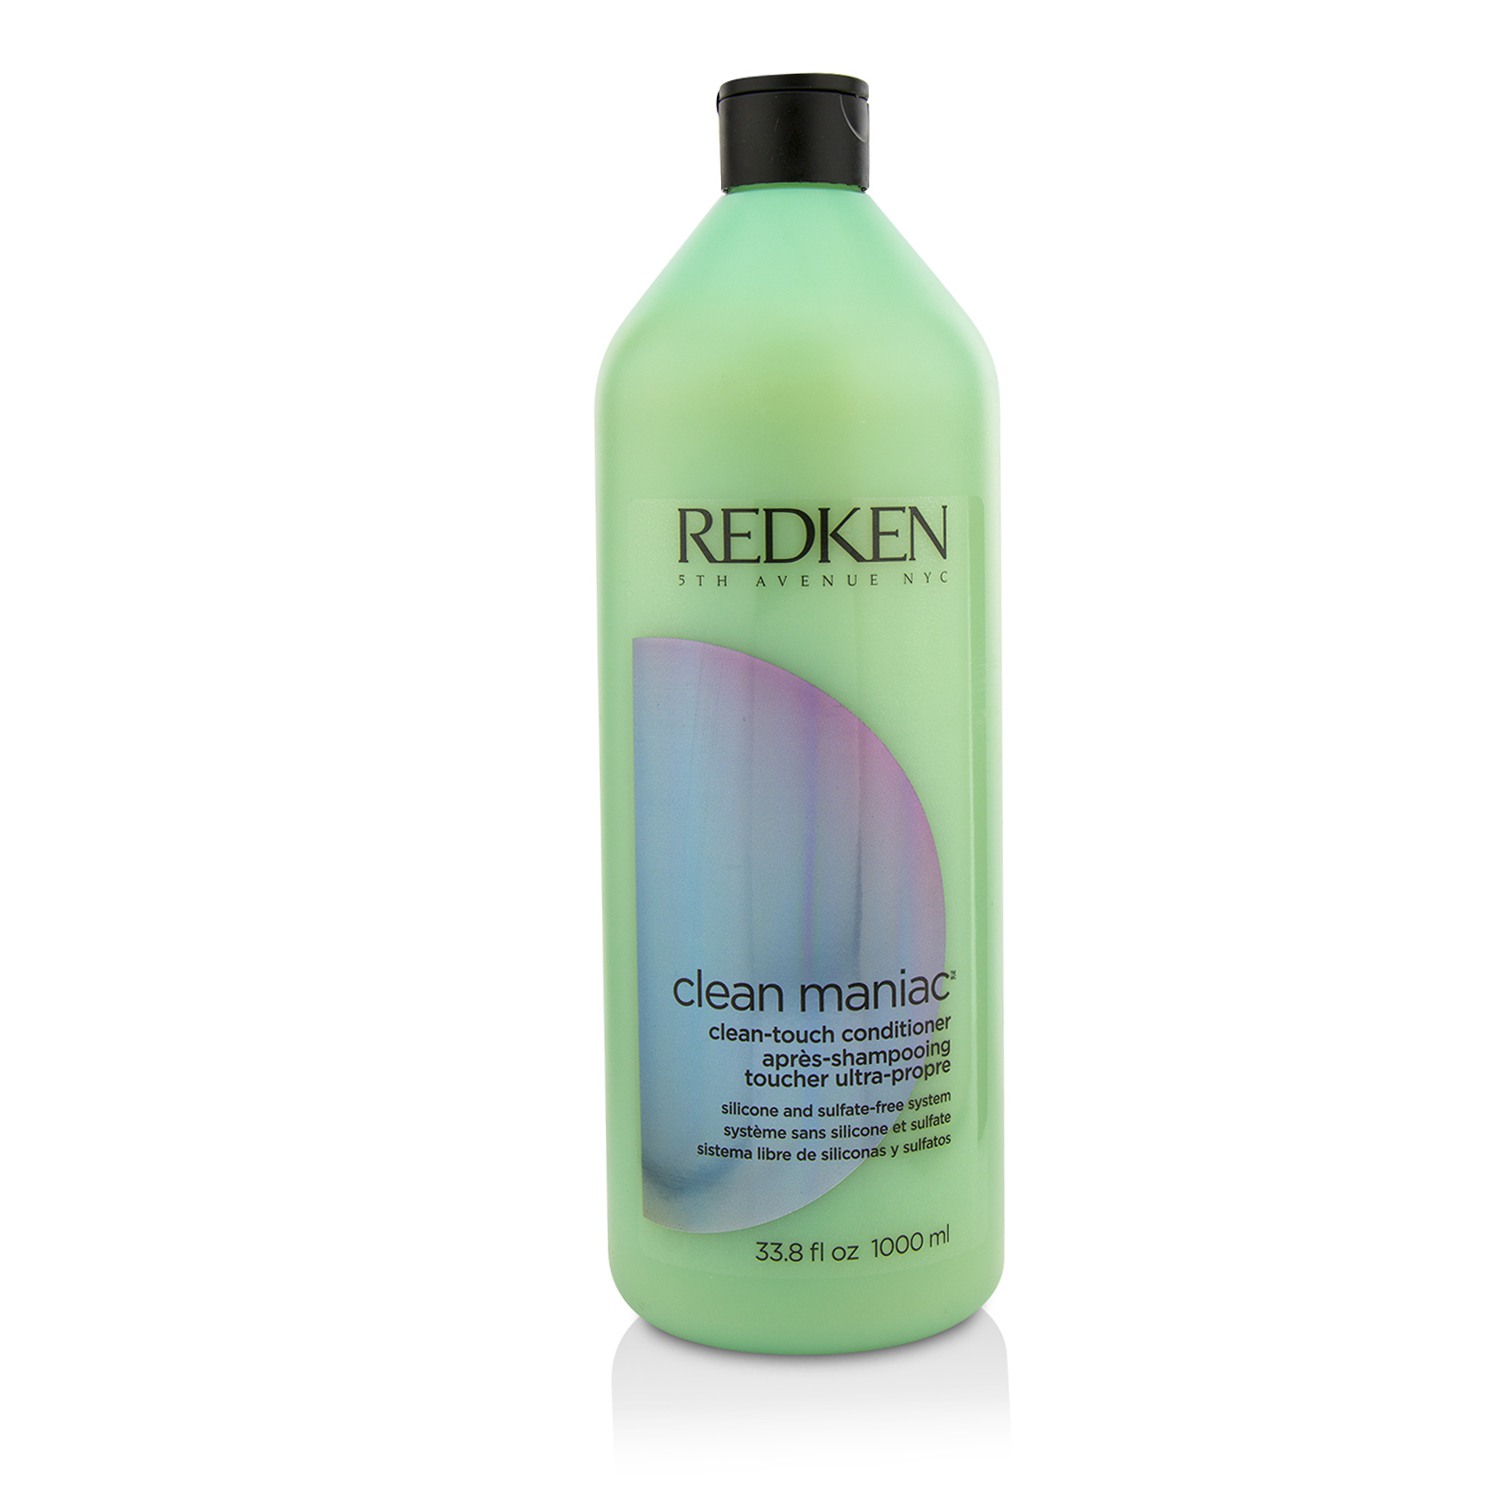 Clean Maniac Clean-Touch Conditioner Redken Image